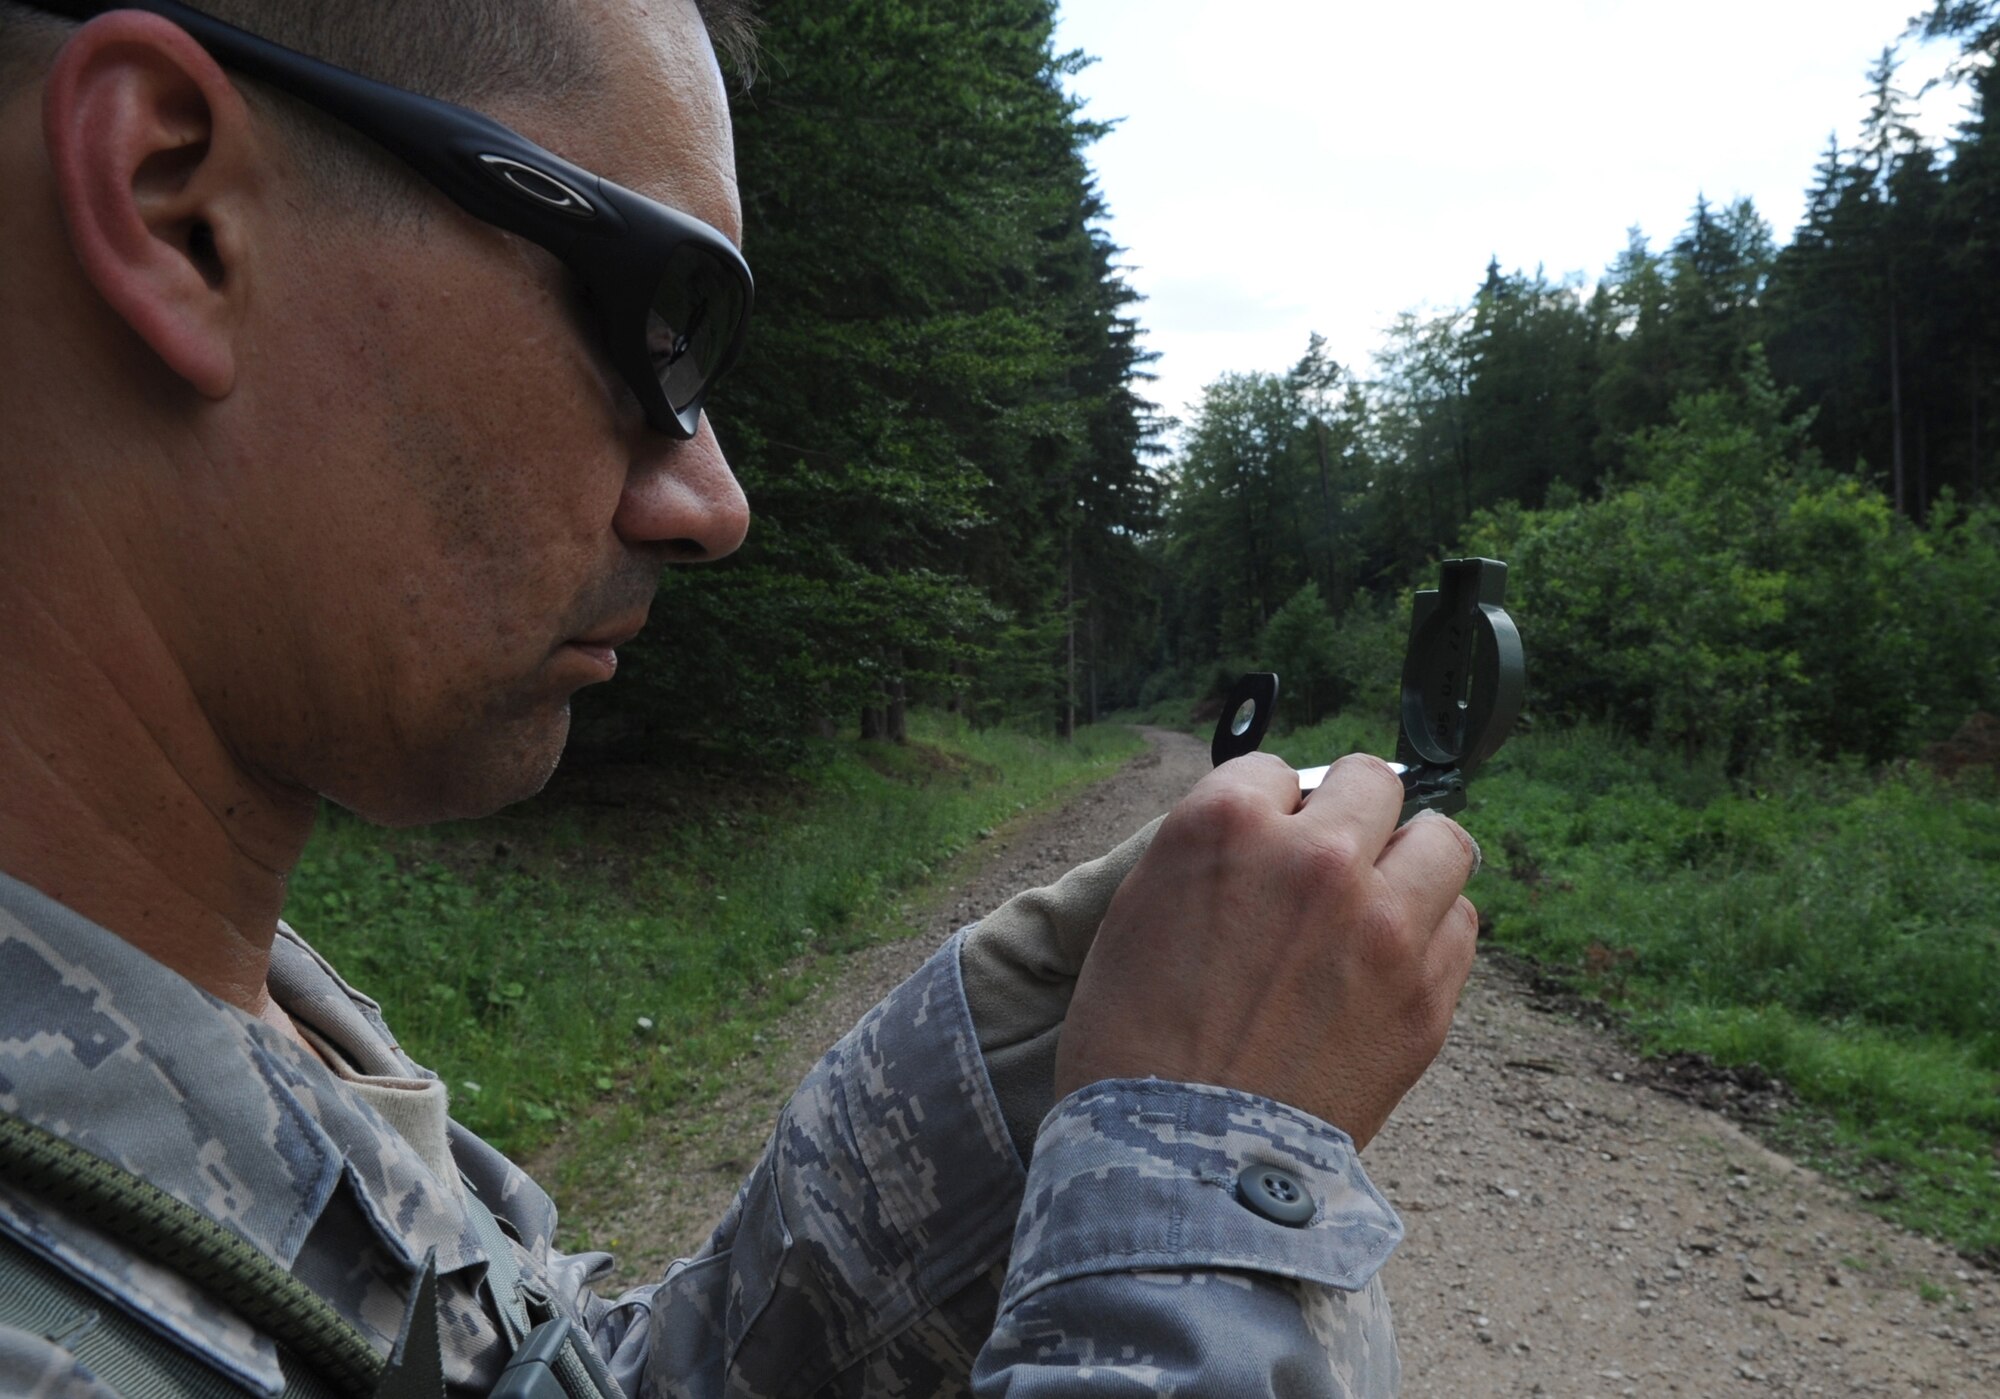 U.S. Air Force Master Sgt. Richard Ribeiro, 4th Air Support Operations Group knowledge operations manager, Campbell Barracks Heidelberg, Germany, uses a compass  to find help find the next way point for a land navigation course during exercise ALLIED STRIKE 10, Grafenwoehr, Germany, July 25, 2010. AS 10 is Europe's premier close air support (CAS) exercise, held annually to conduct robust, realistic CAS training that helps build partnership capacity among allied North Atlantic Treaty Organization nations and joint services while refining the latest operational CAS tactics. For more ALLIED STRIKE information go to www.usafe.af.mil/alliedstrike.asp. (U.S. Air Force photo by Senior Airman Caleb Pierce)